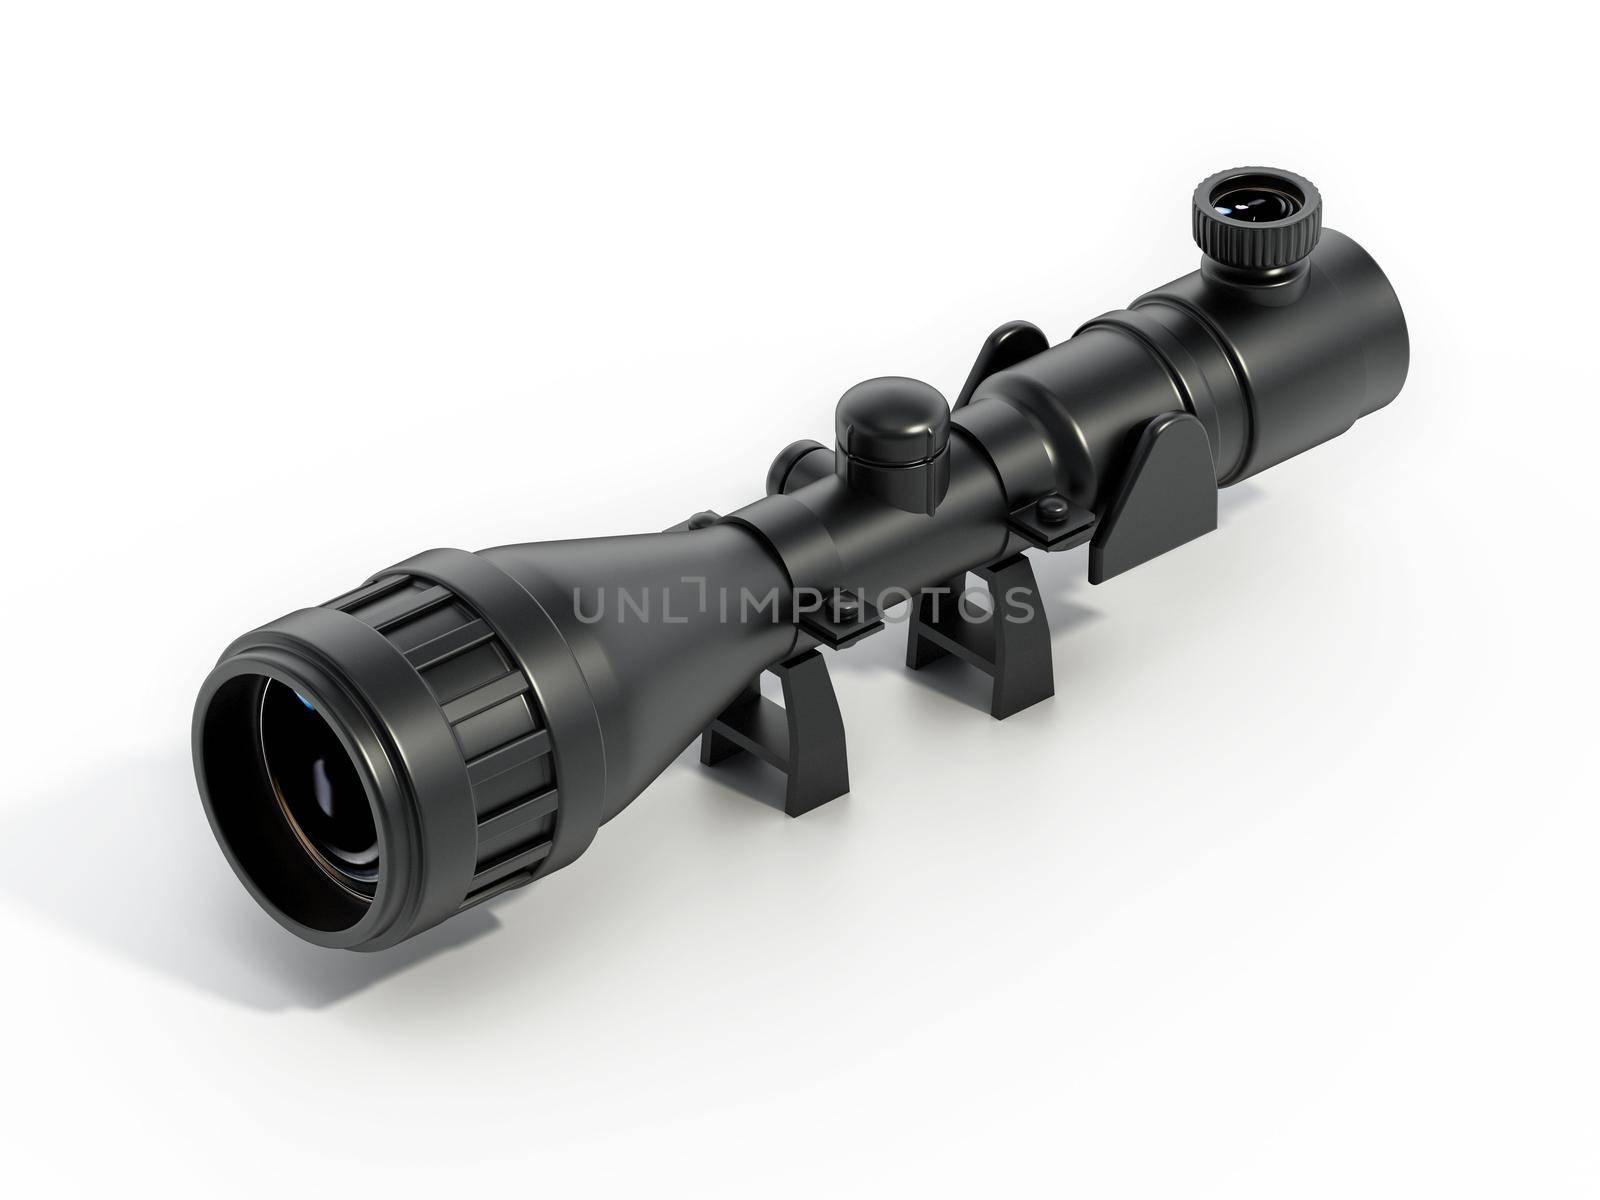 Rifle scope isolated on white background. 3D illustration by Simsek